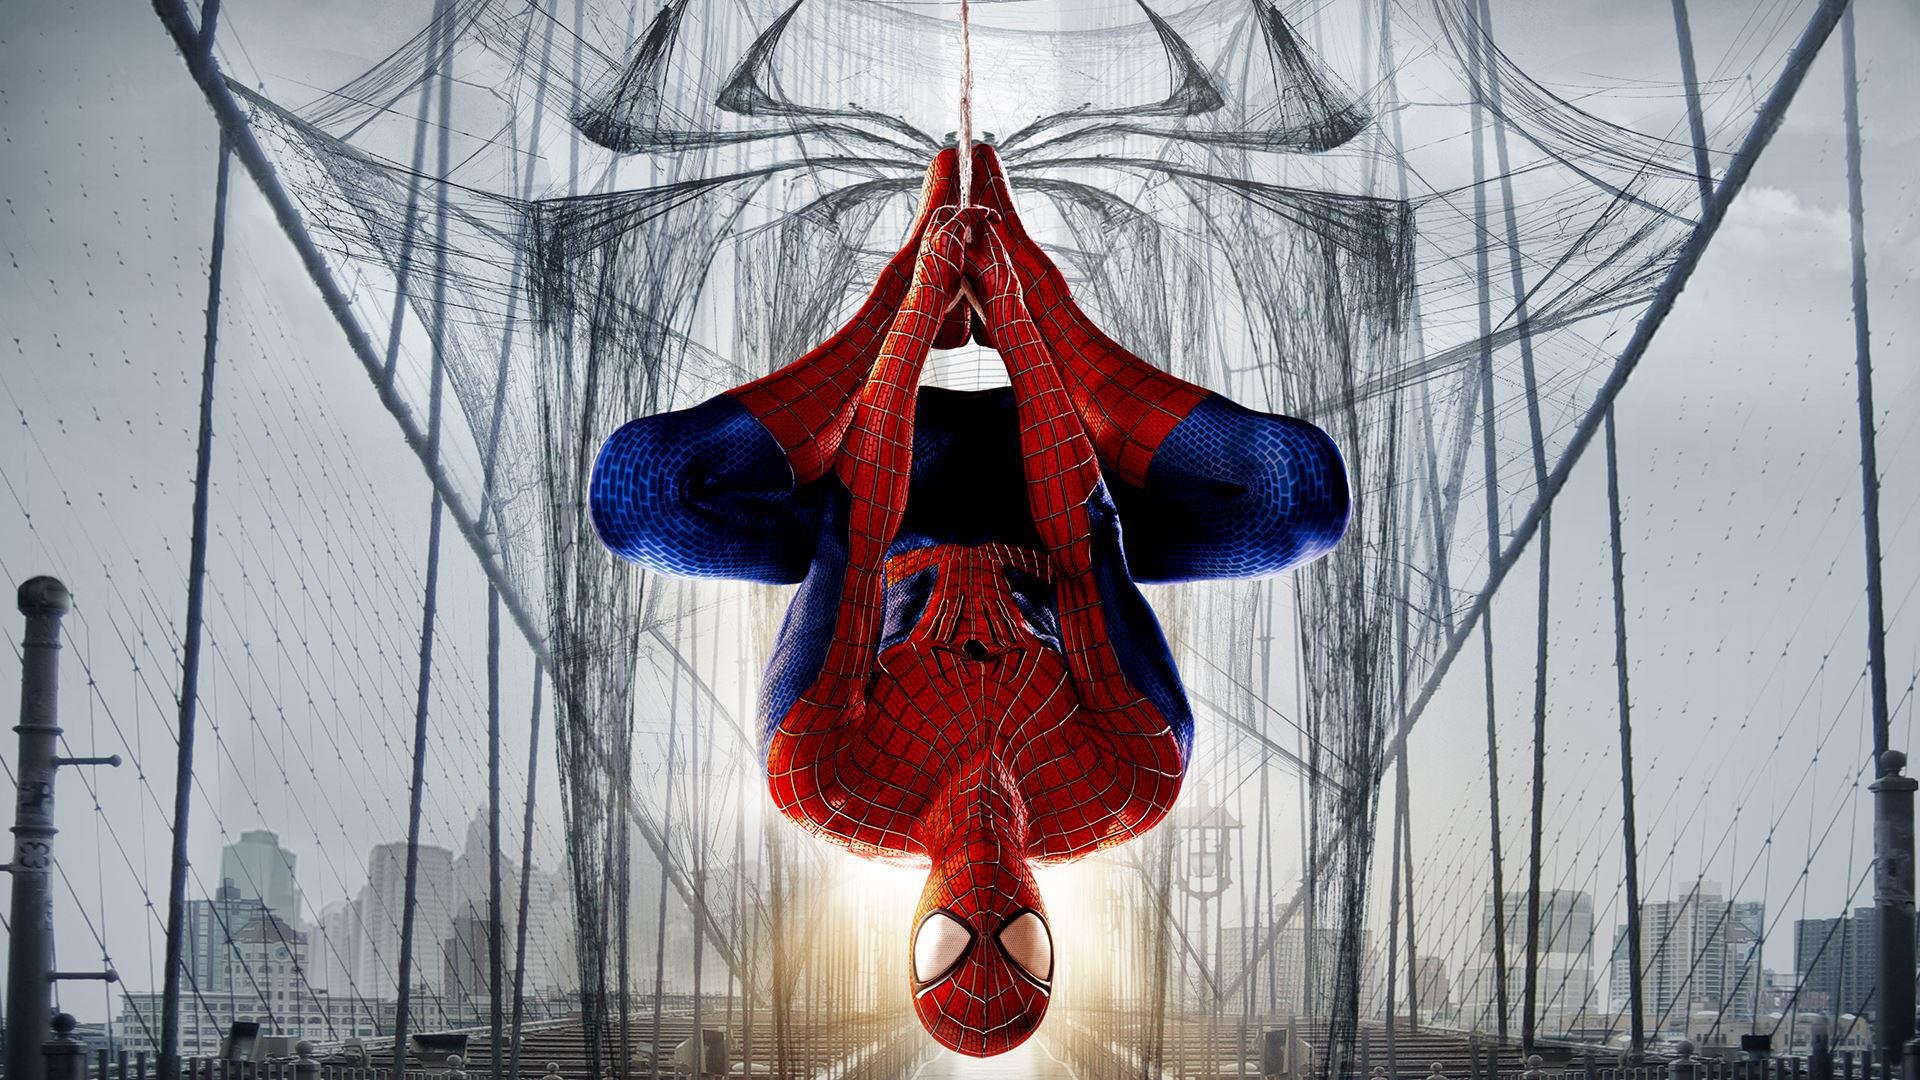 Spiderman images free download